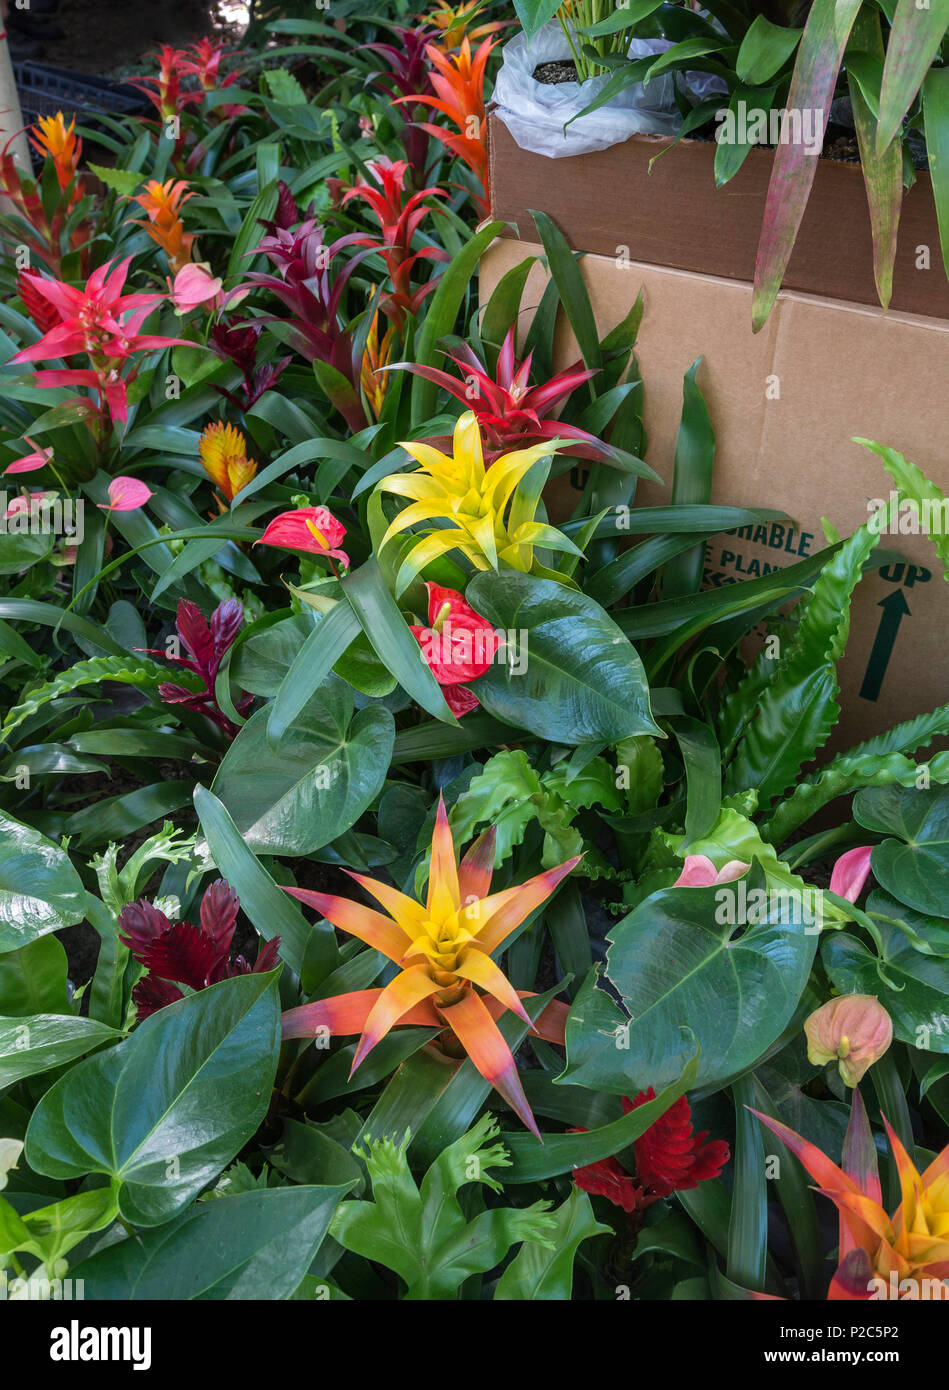 Spring Garden Festival in Gainesville, Florida. Colorful bromeliads for sale Stock Photo